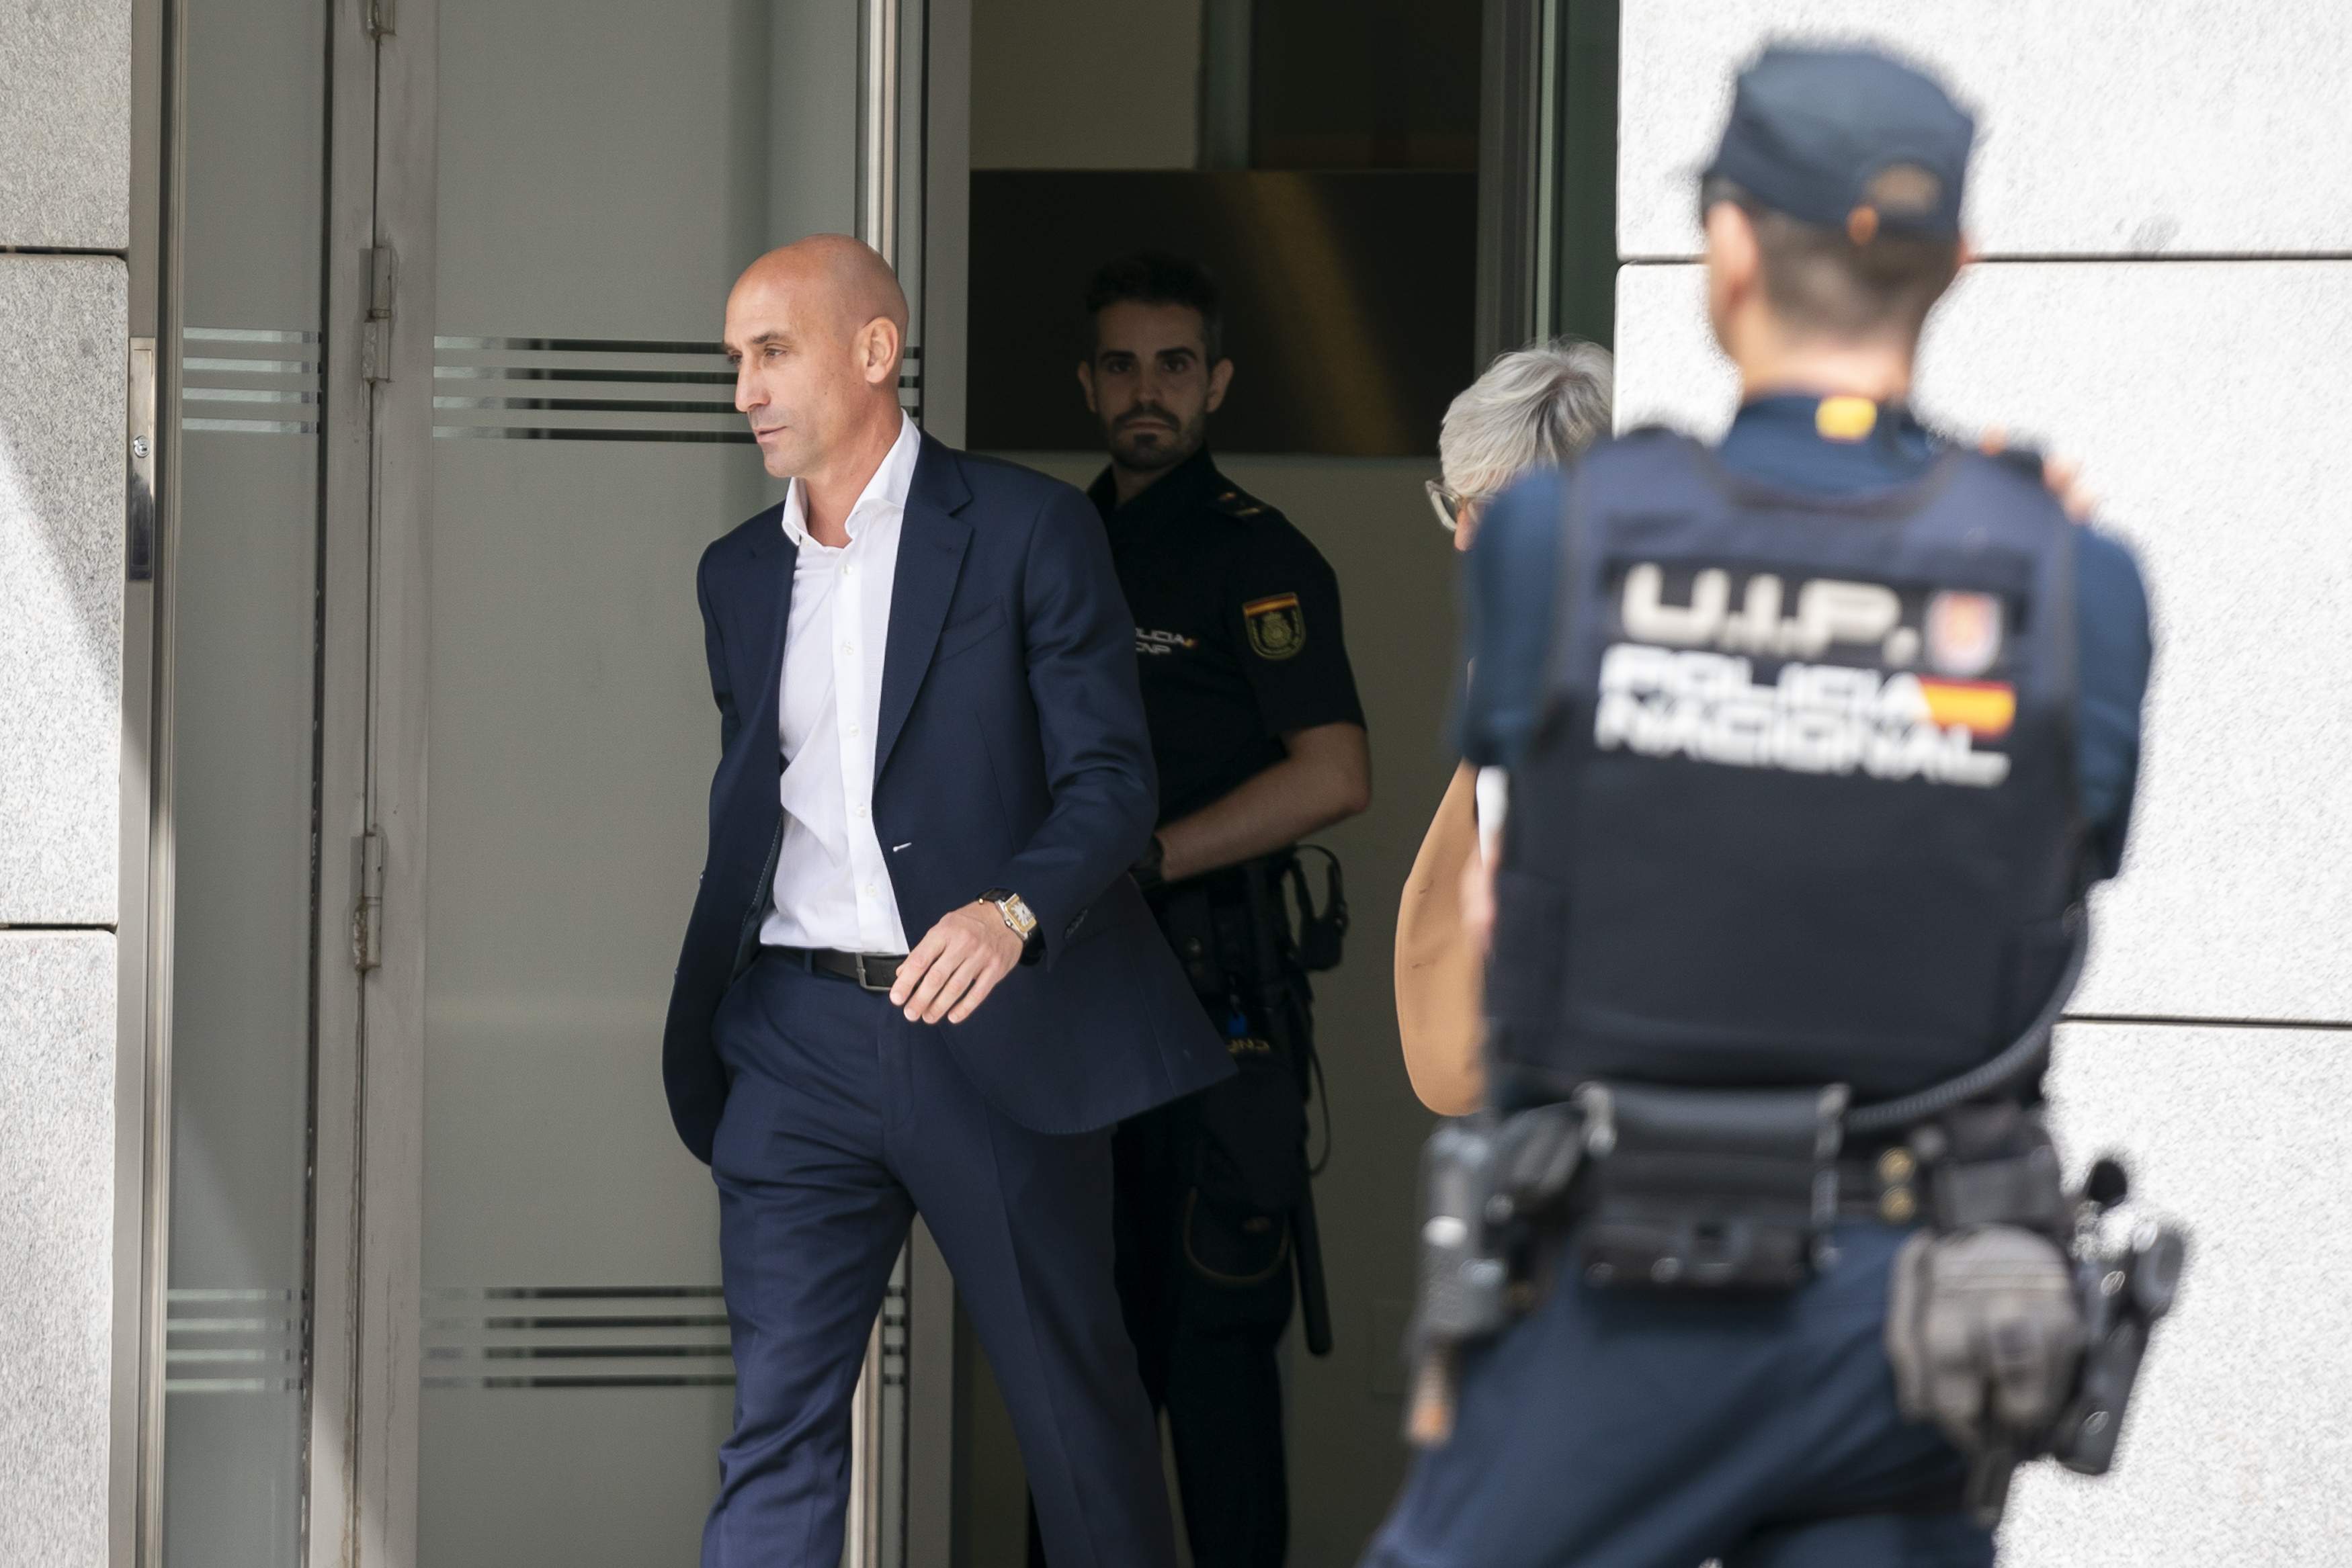 Luis Rubiales returns early to Spain after football corruption allegations and awaits judge's call